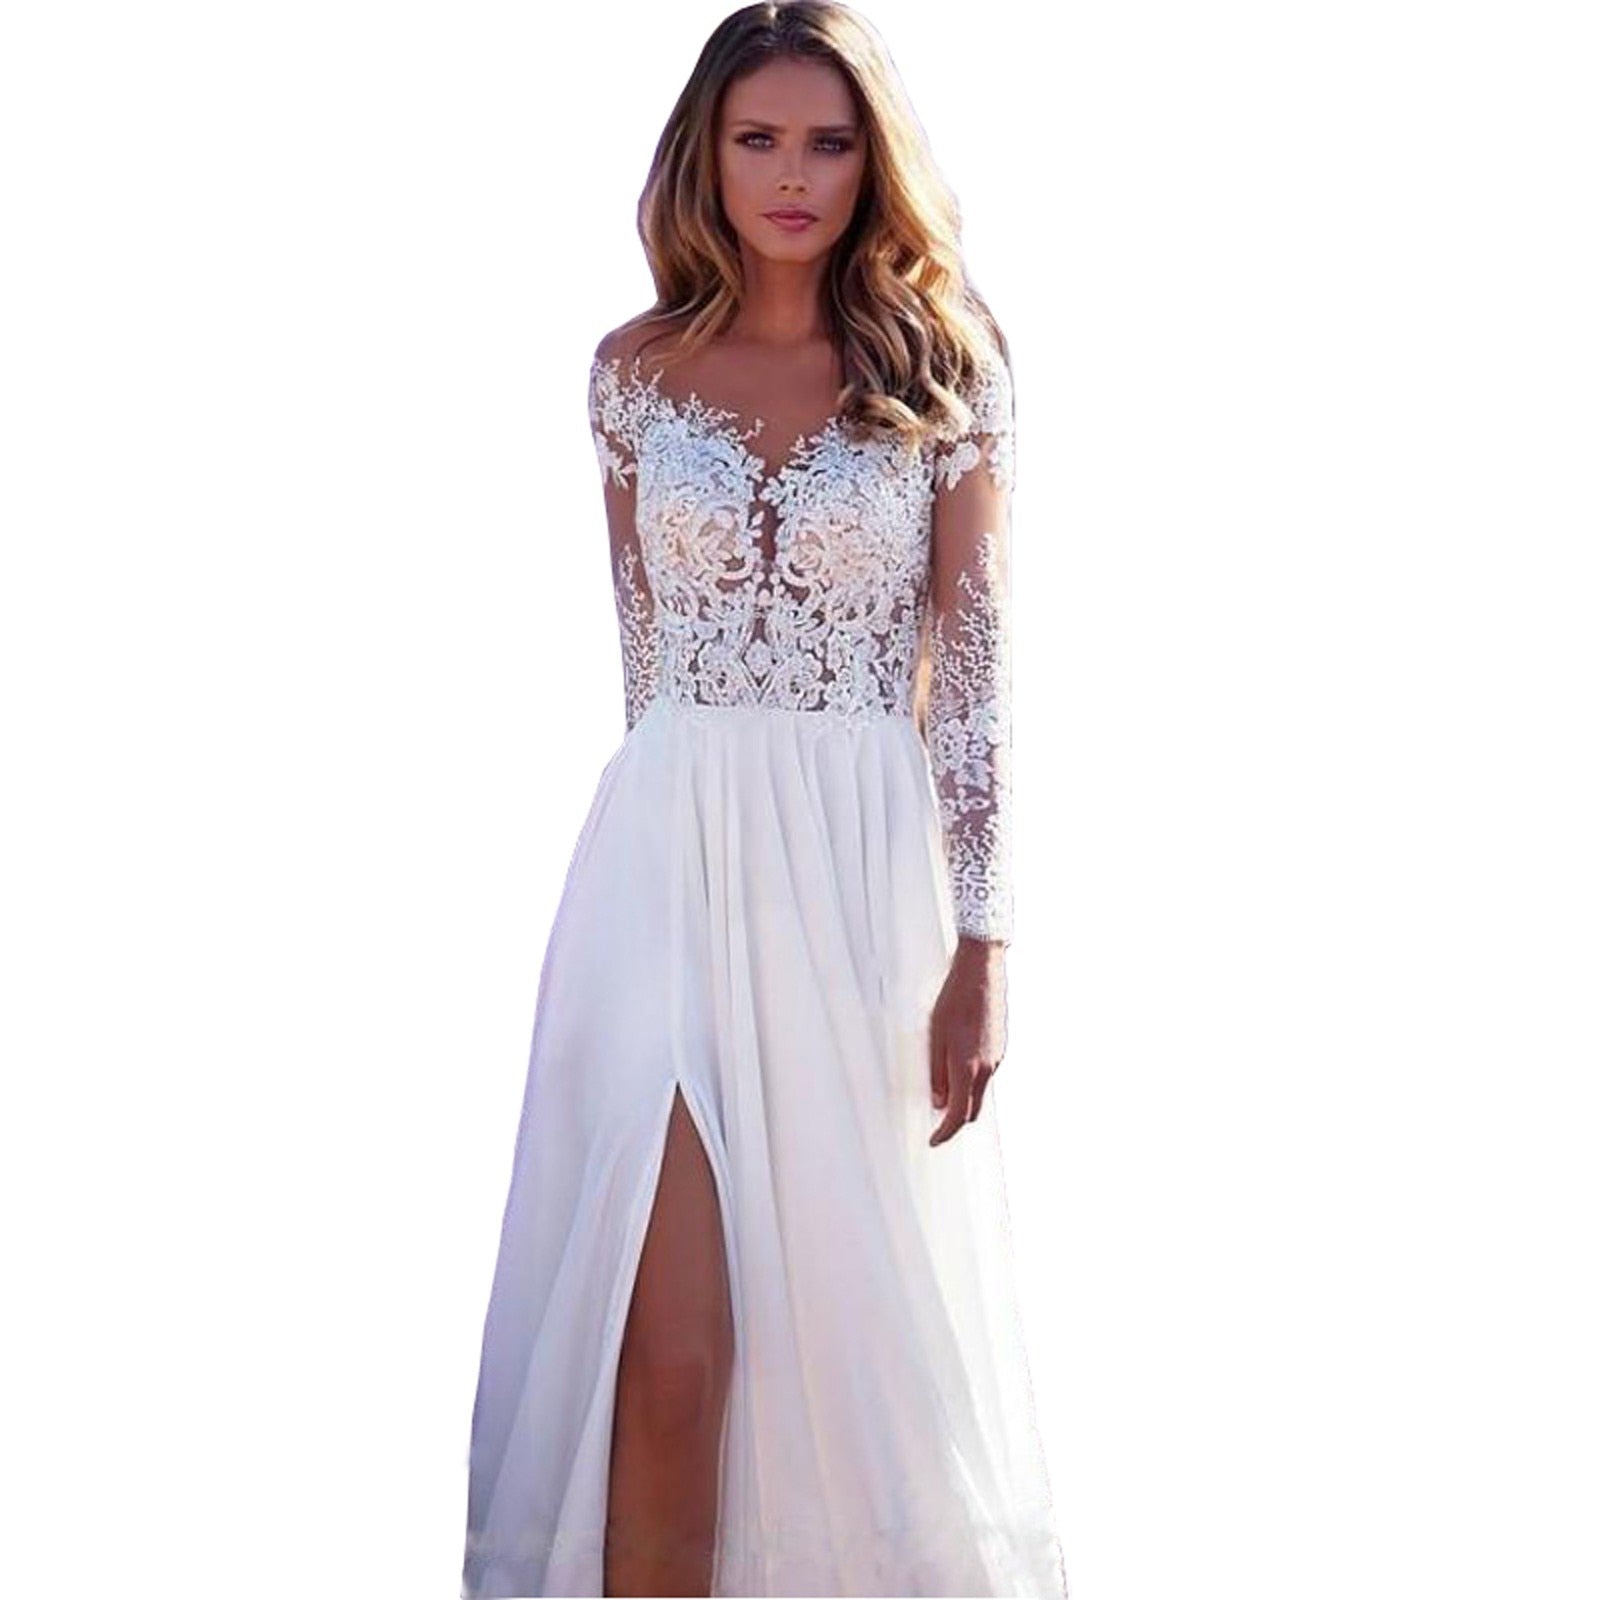 Stunning Long-Sleeved See-Through Lace Wedding Dress with Split Long Bridal Gown